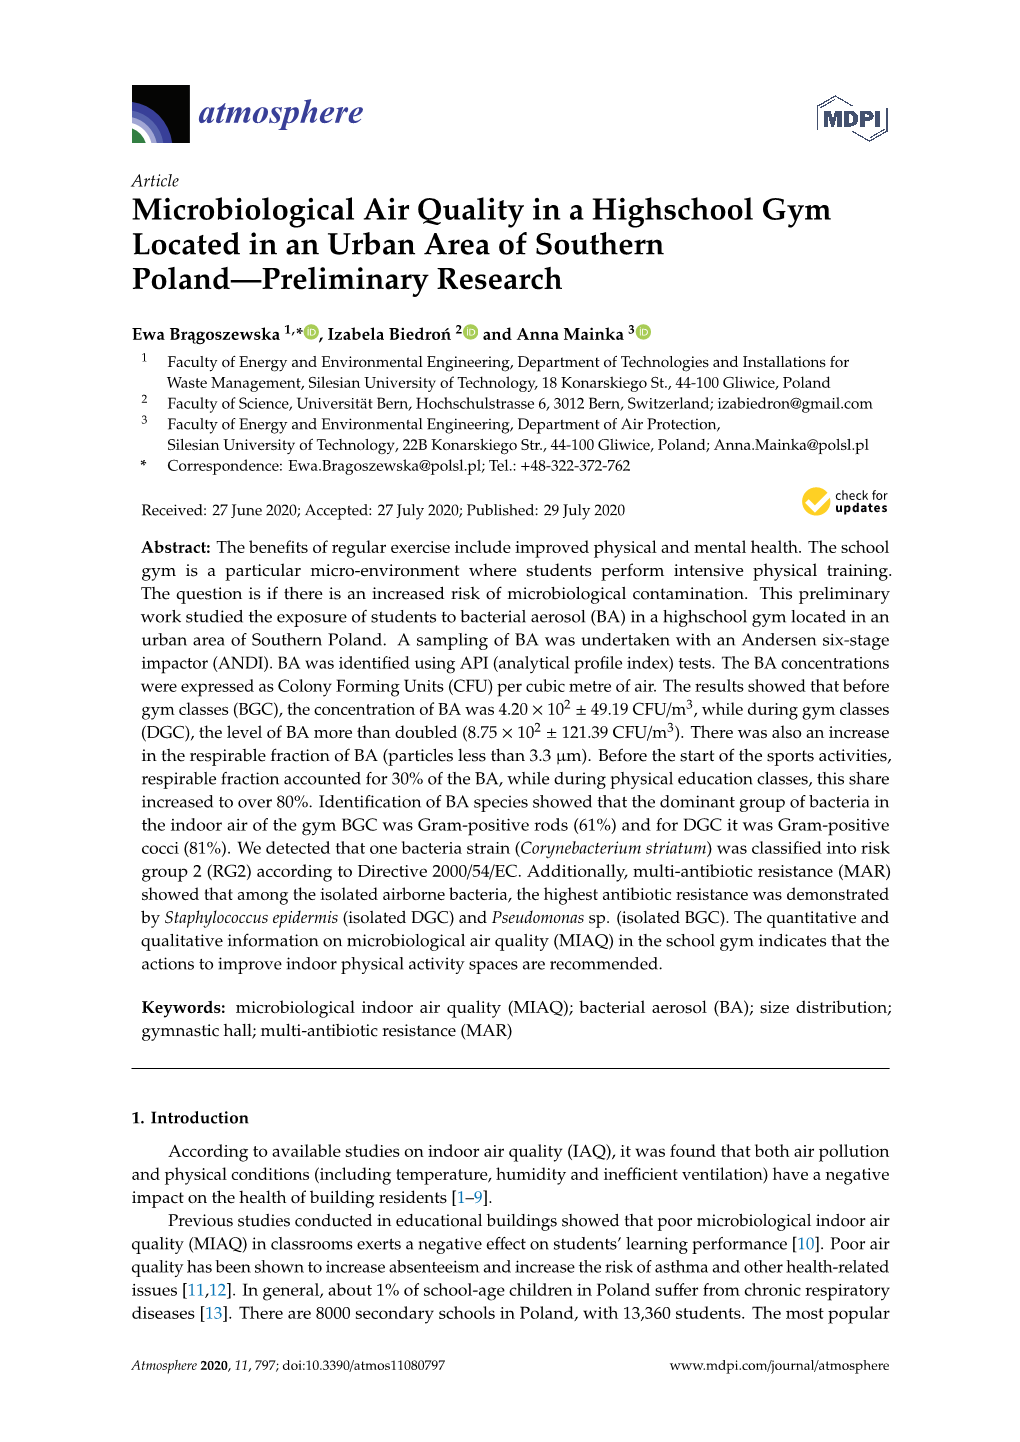 Microbiological Air Quality in a Highschool Gym Located in an Urban Area of Southern Poland—Preliminary Research